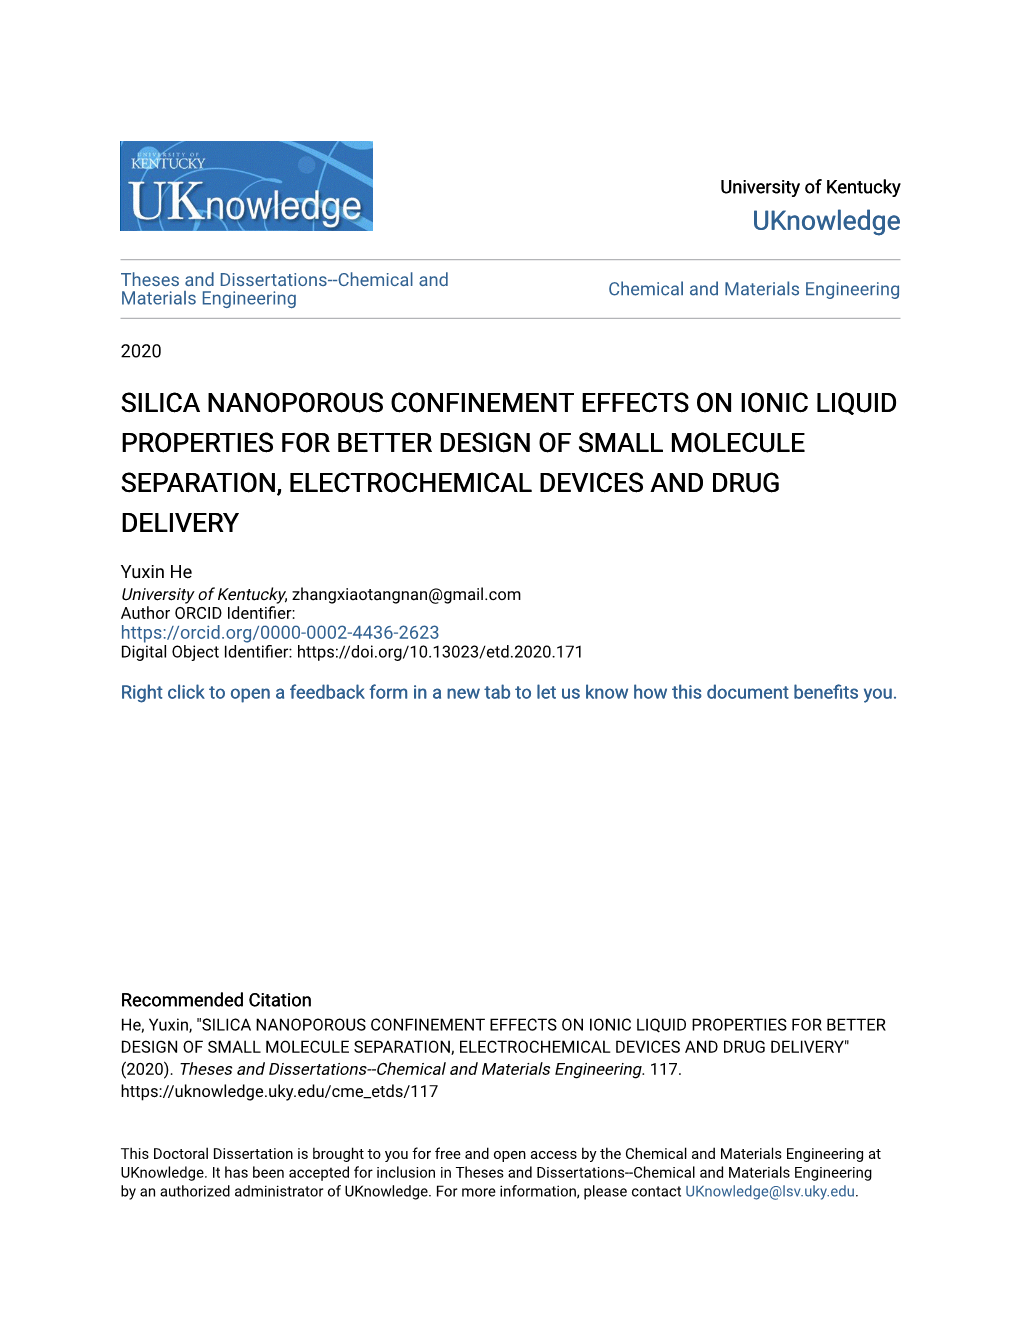 Silica Nanoporous Confinement Effects on Ionic Liquid Properties for Better Design of Small Molecule Separation, Electrochemical Devices and Drug Delivery